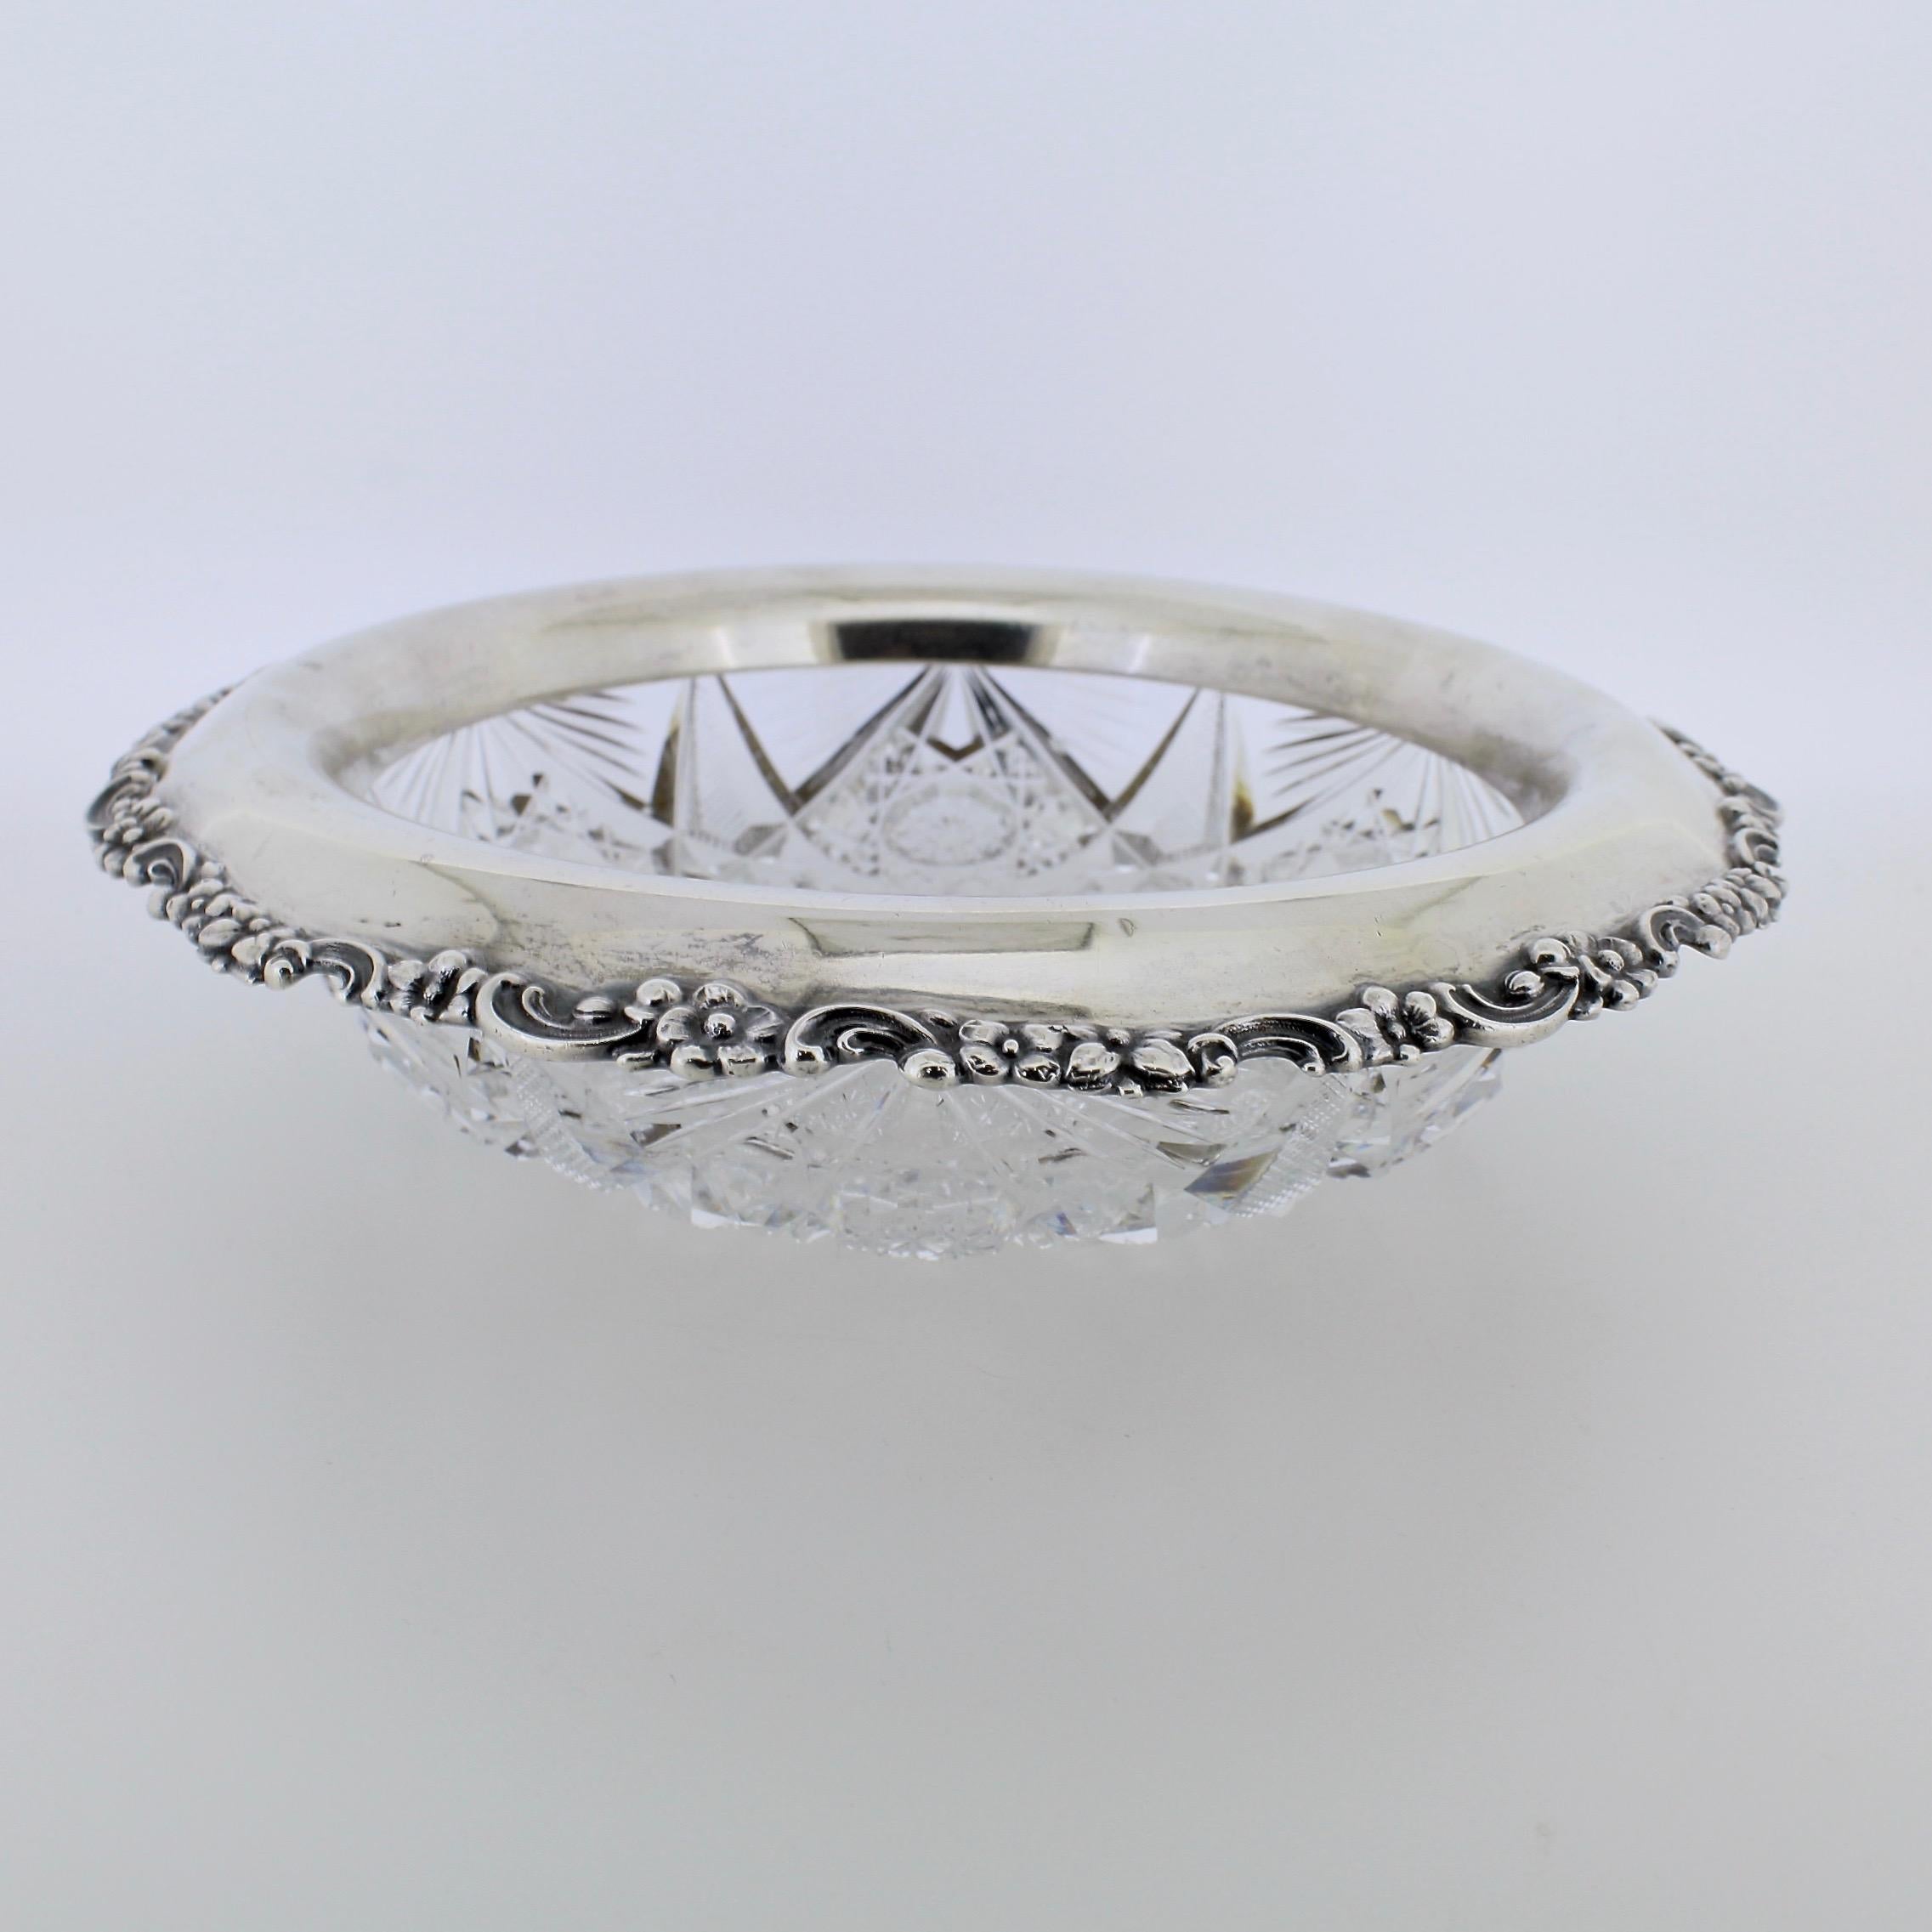 A very fine, antique Tiffany & Co. cut glass and sterling silver bowl.

With a fine and deep cut to an American Brilliant Period glass bowl that is mounted with an ornate Tiffany & Co. sterling silver collar.

The collar has an everted rim, a floral